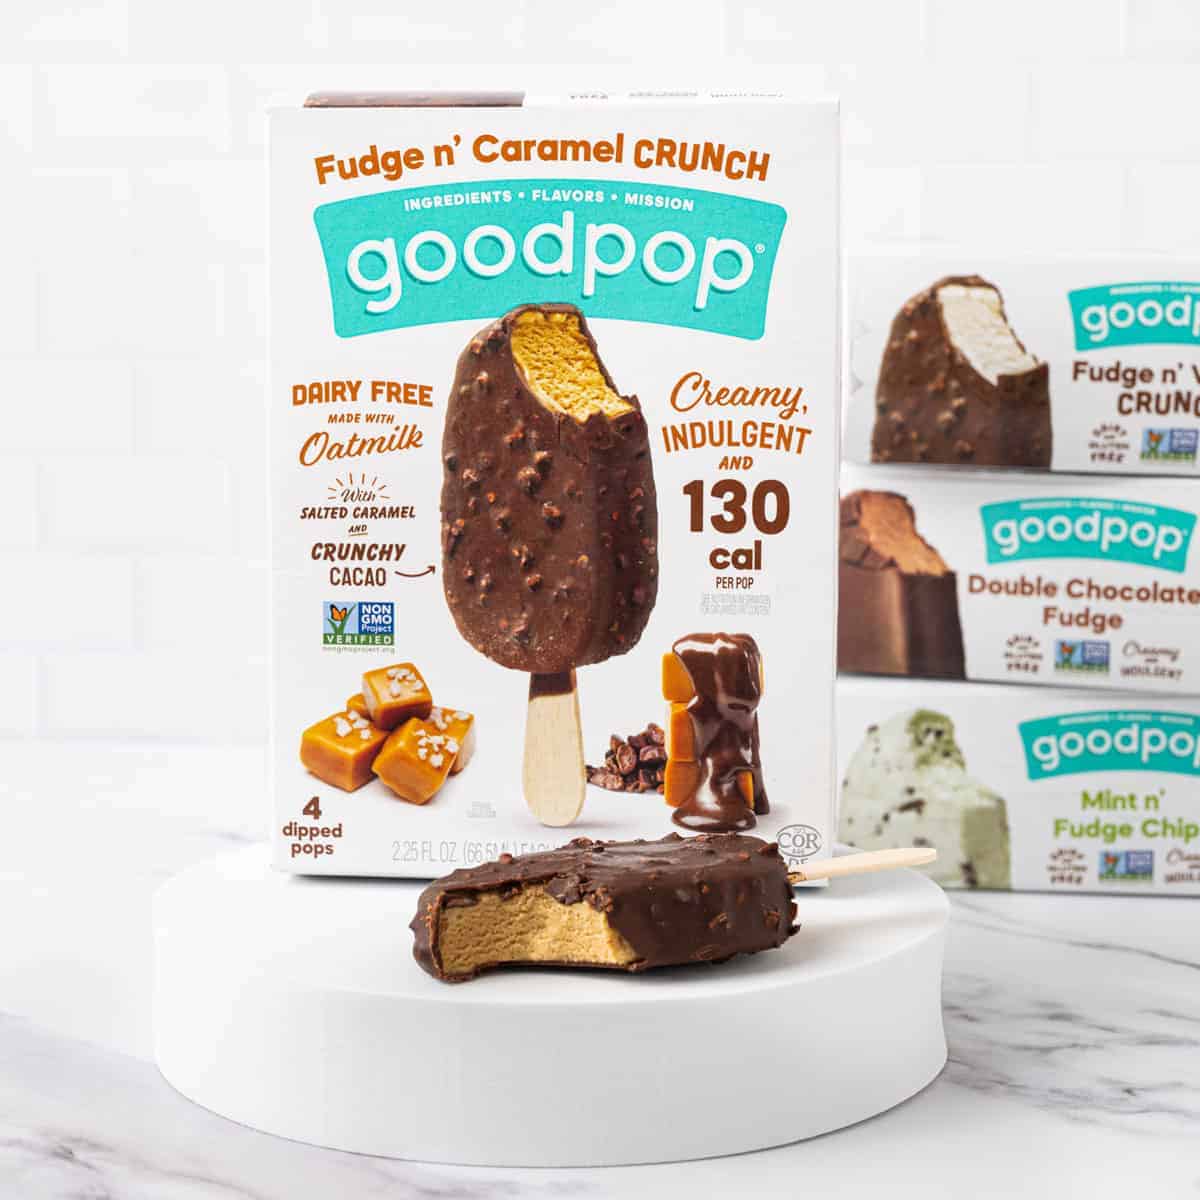 A box of GoodPop's Fudge n' Caramel Crunch dipped bars with a popsicle in front of it with a bite taken out.